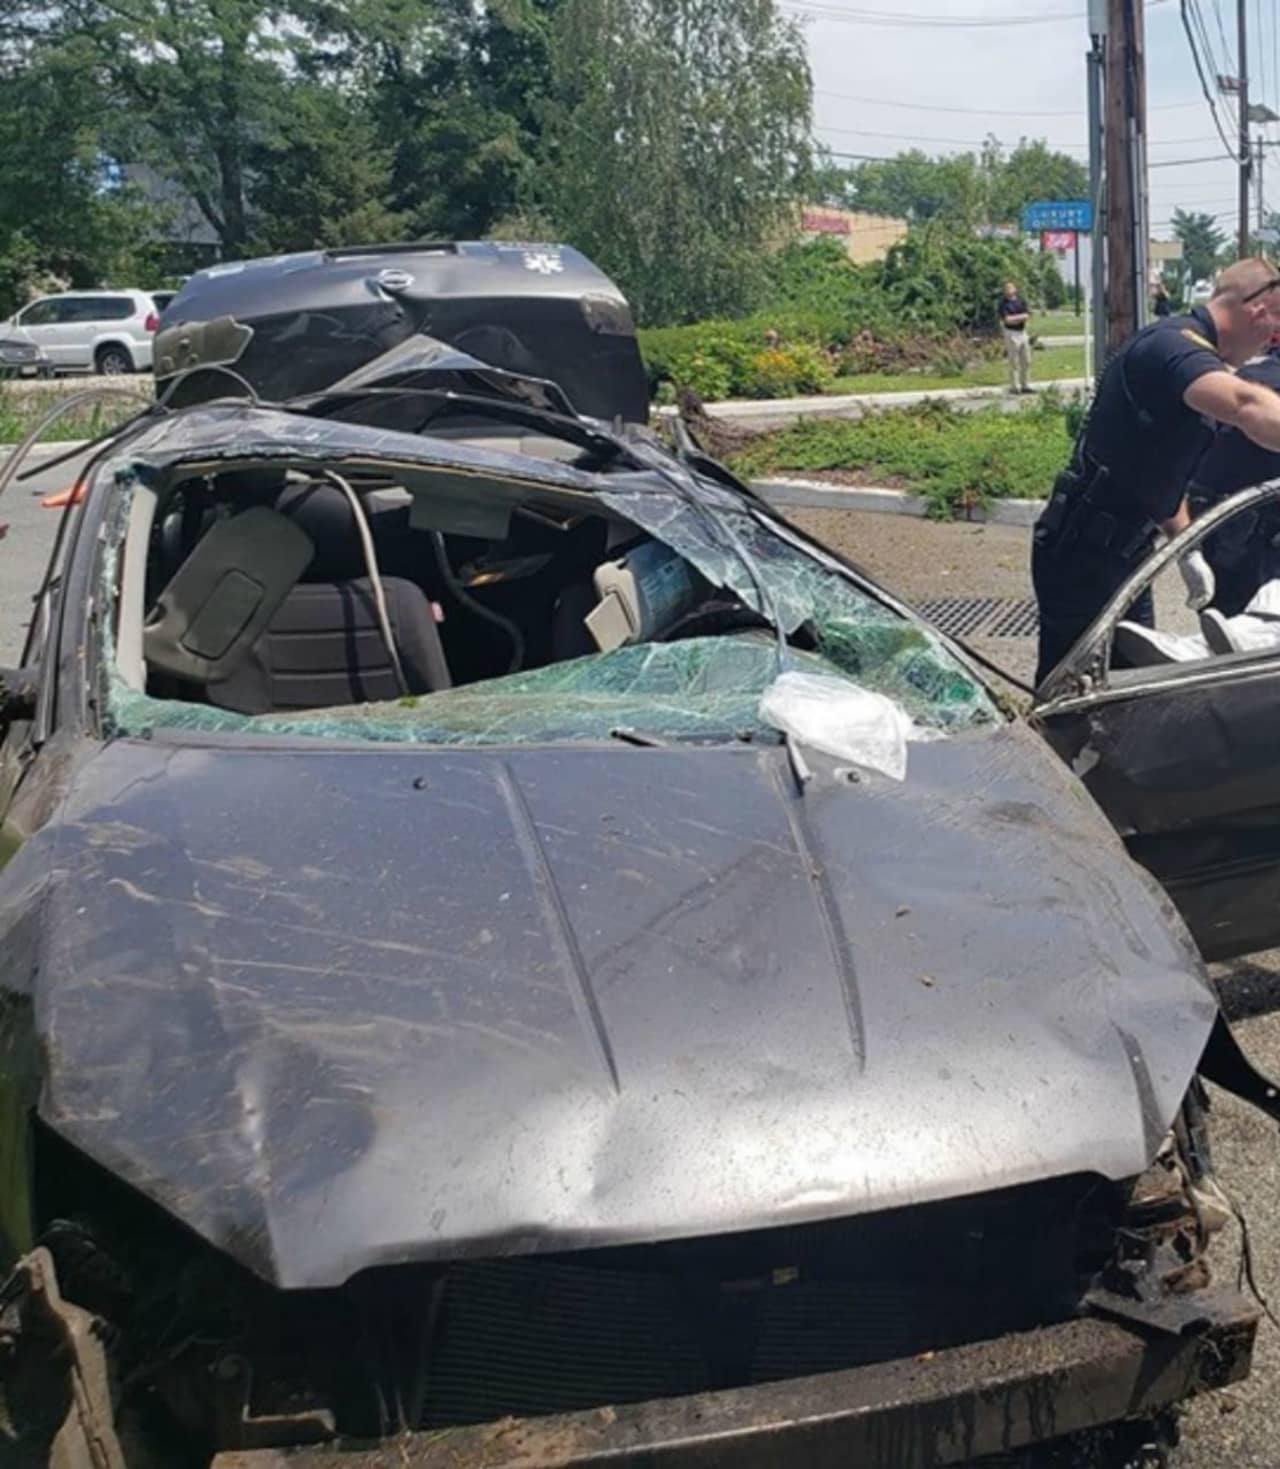 A Harrison man had to be freed from this car following a crash Wednesday in Fairfield.